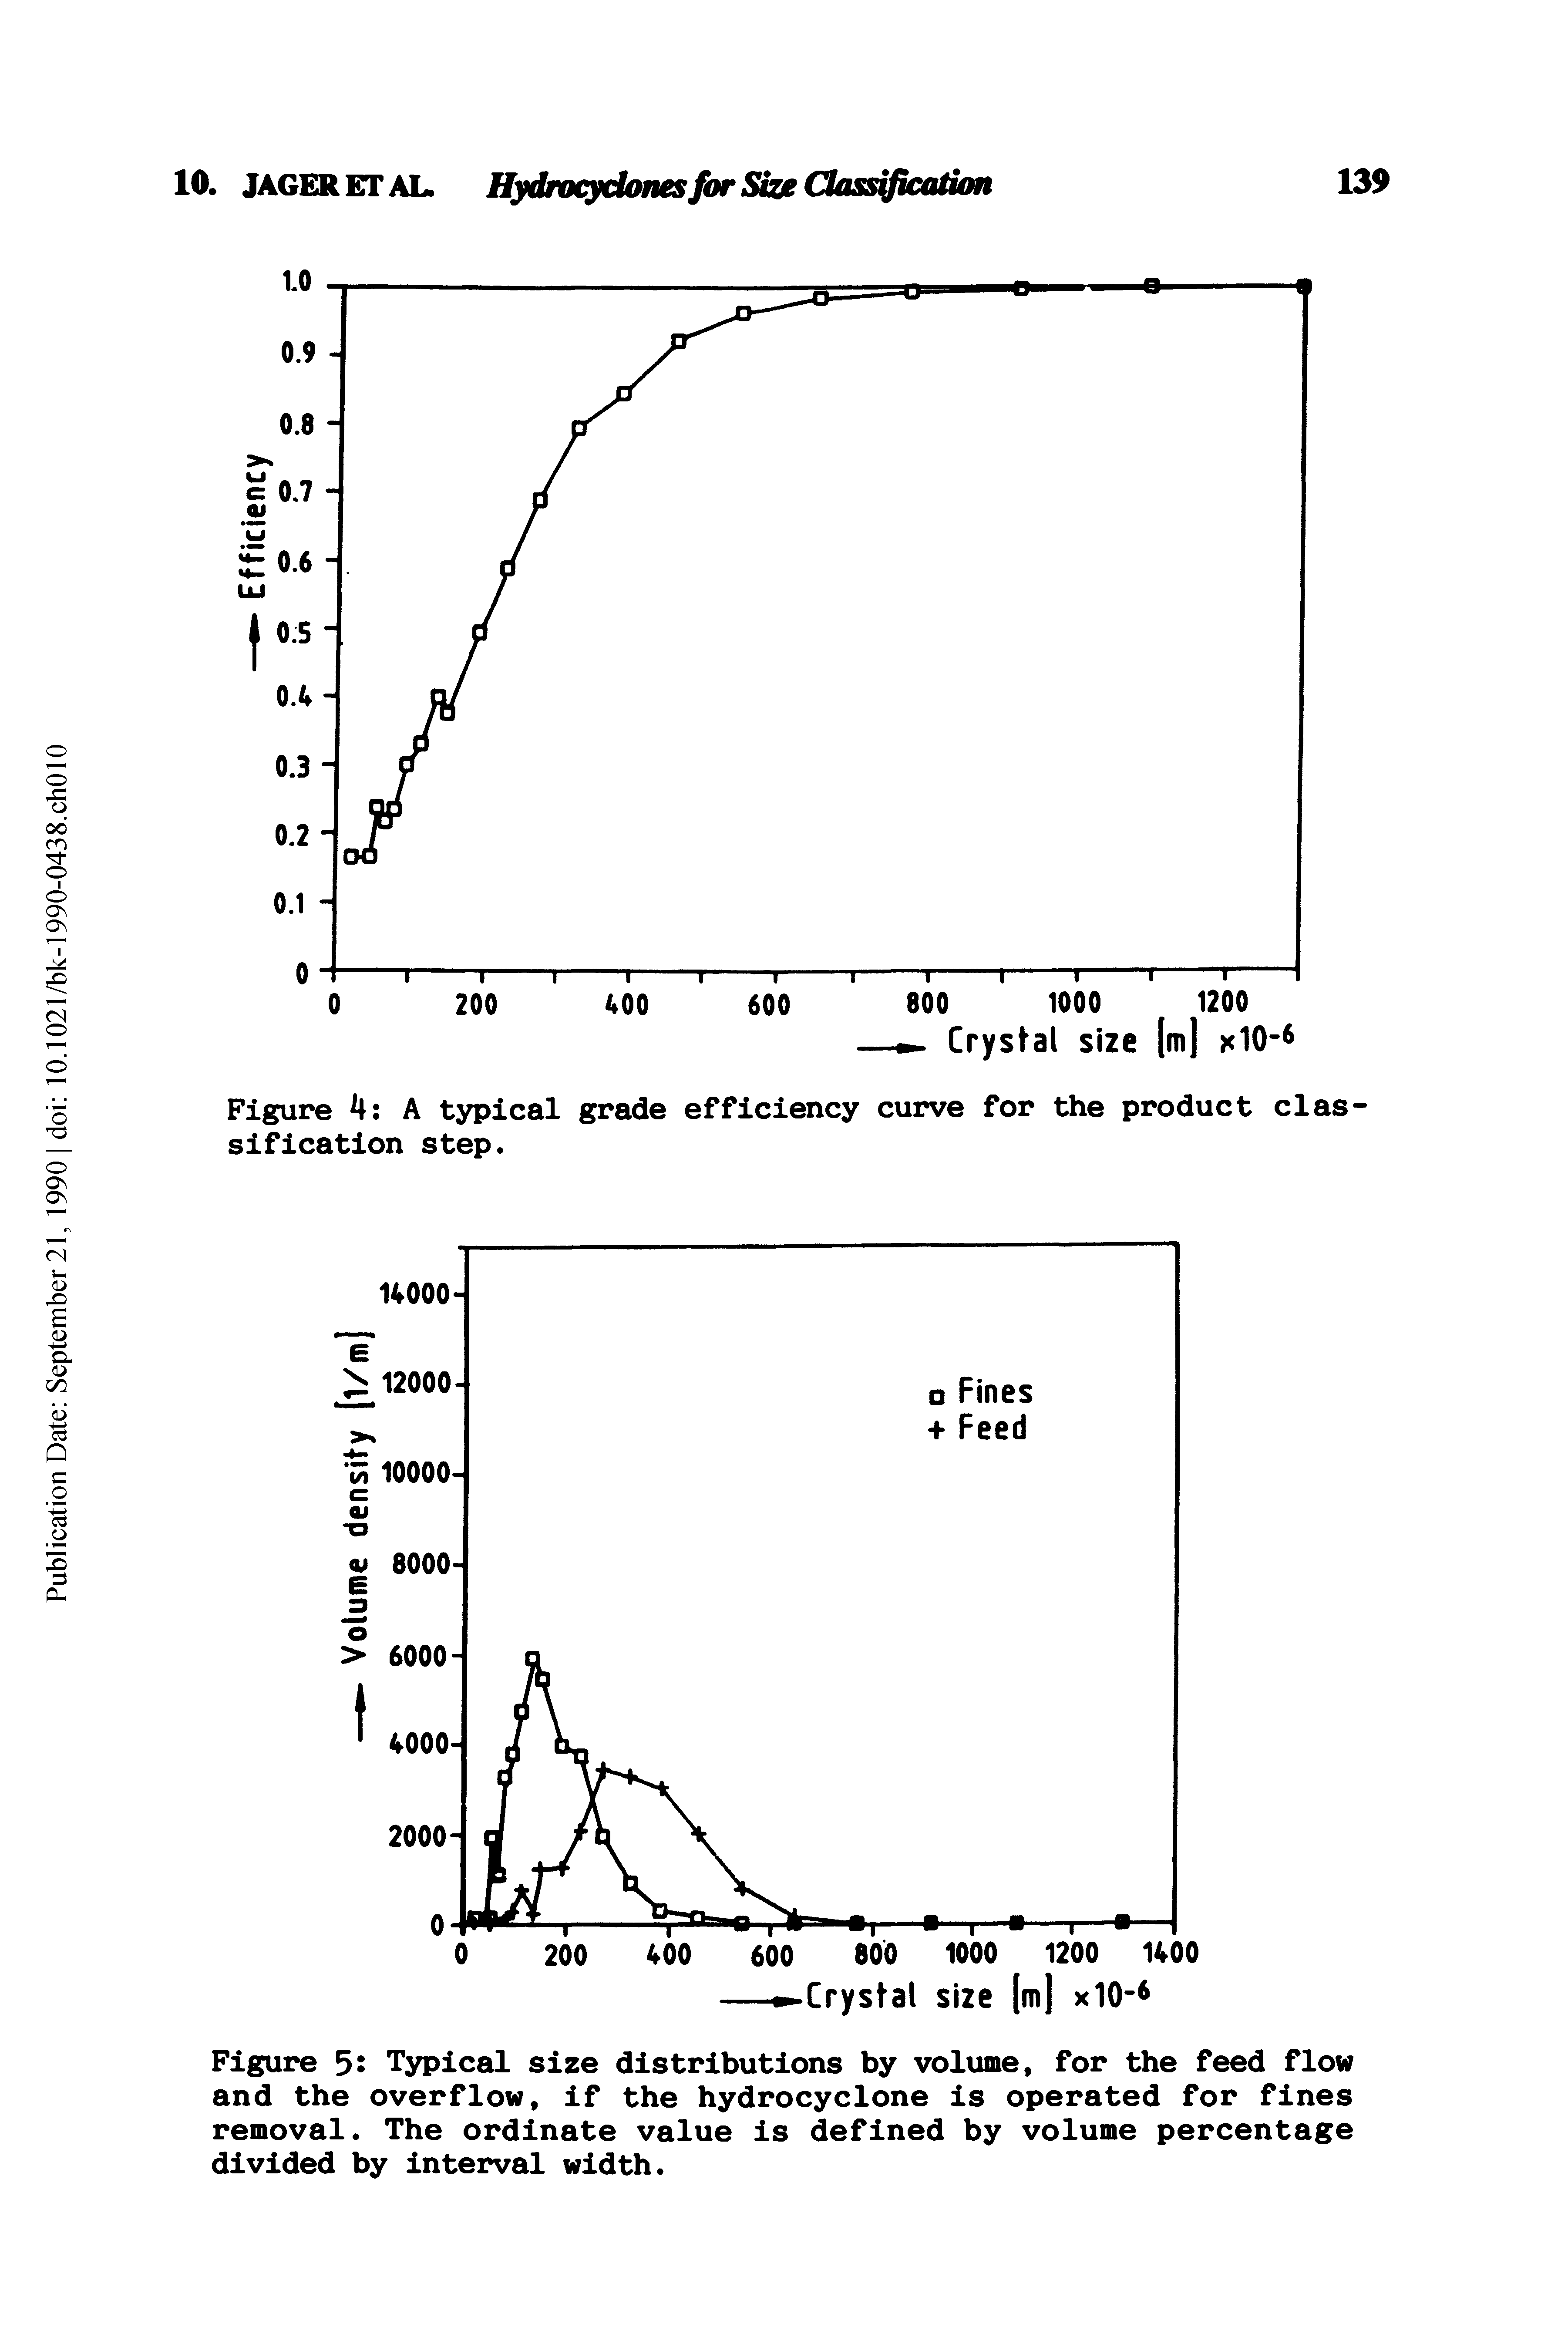 Figure 55 Typical size distributions by volume, for the feed flow and the overflow, if the hydrocyclone is operated for fines removal. The ordinate value is defined by volume percentage divided by interval width.